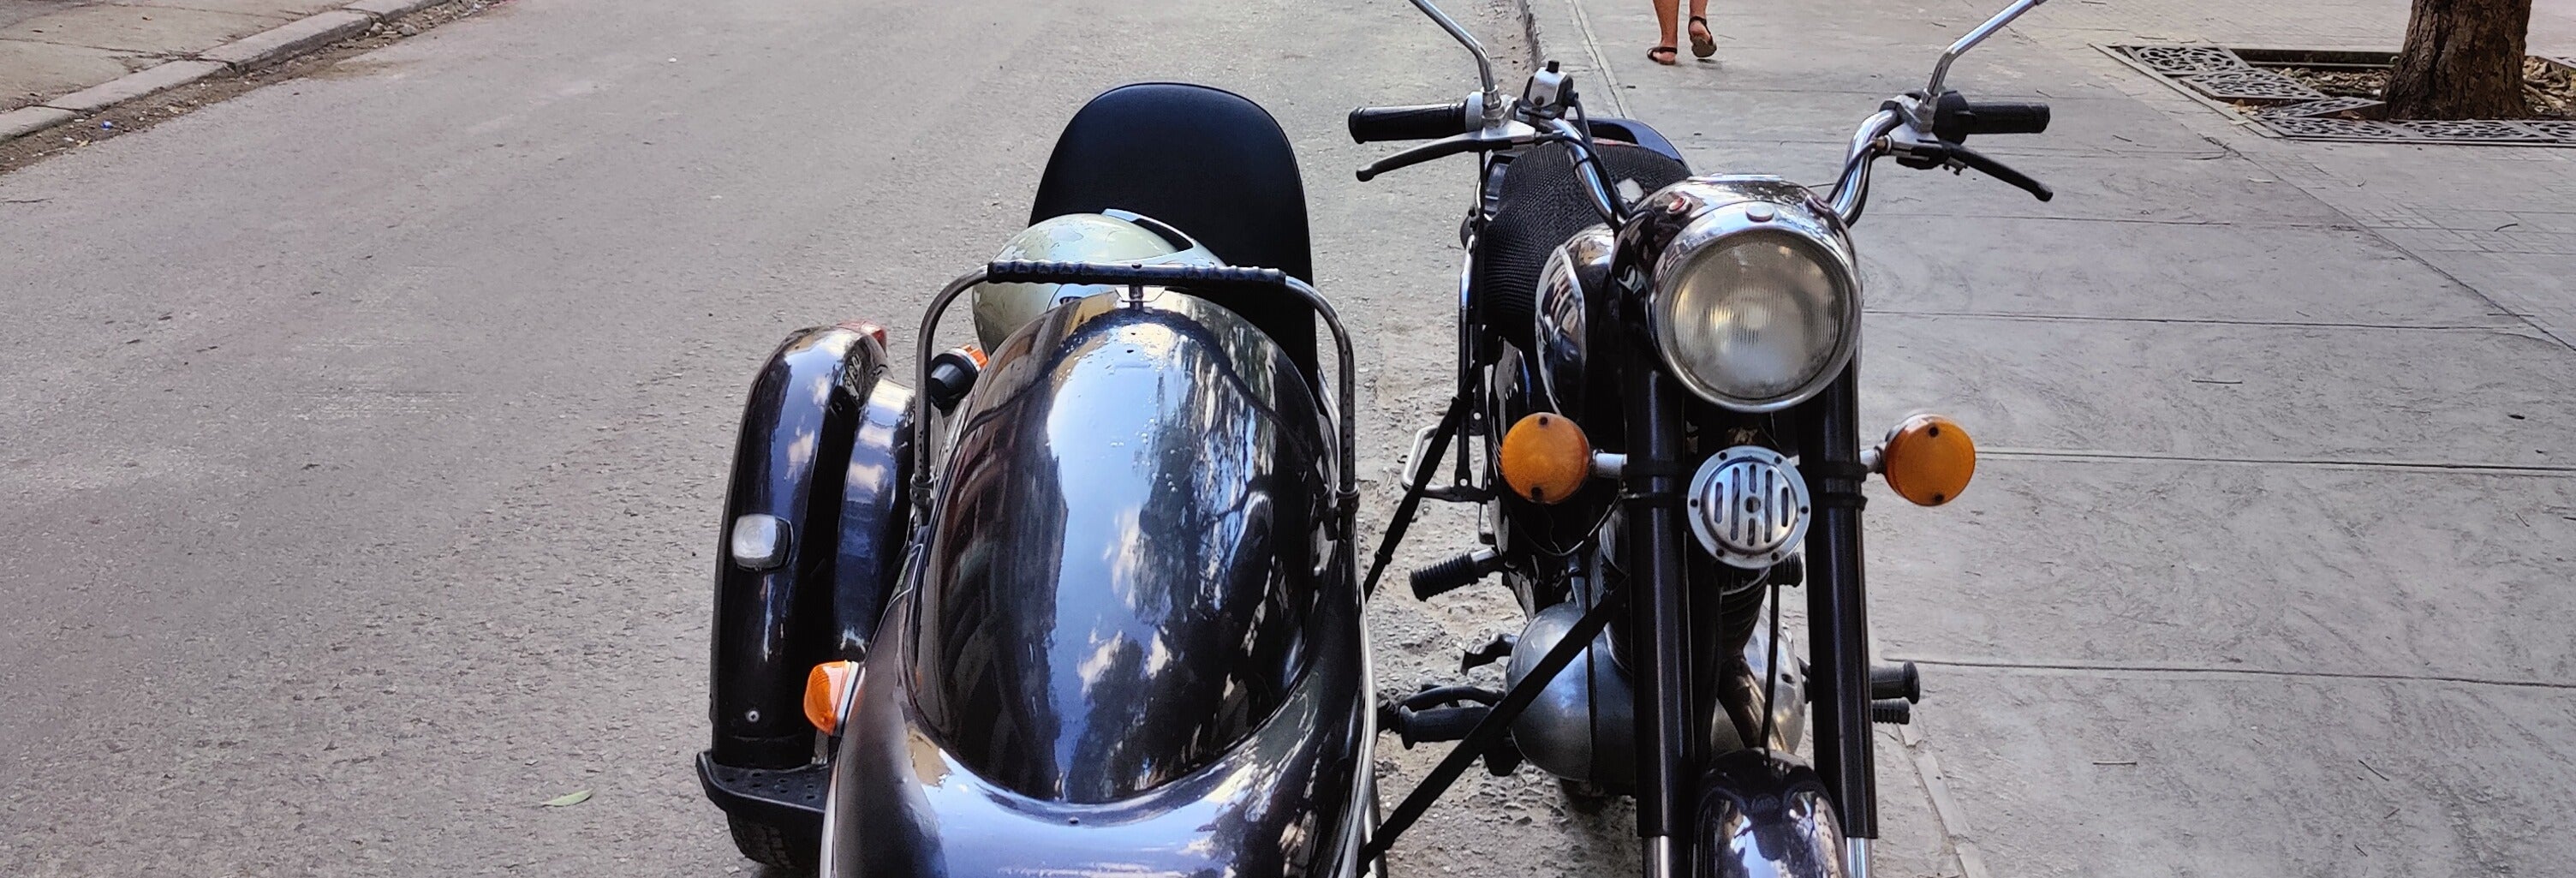 Classic or Sidecar Motorcycle Tour of Havana